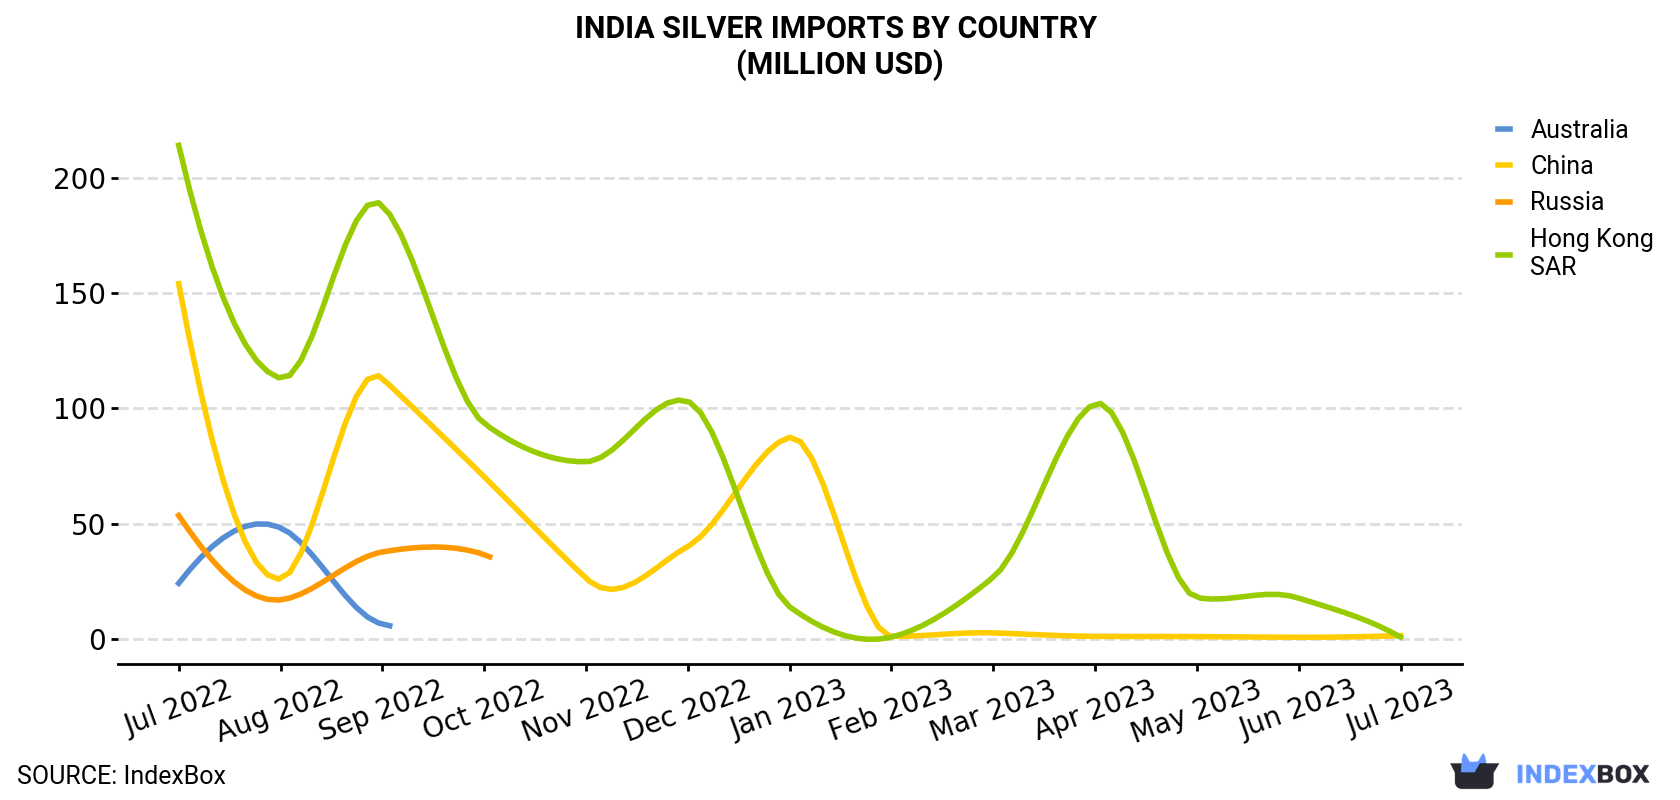 India Silver Imports By Country (Million USD)